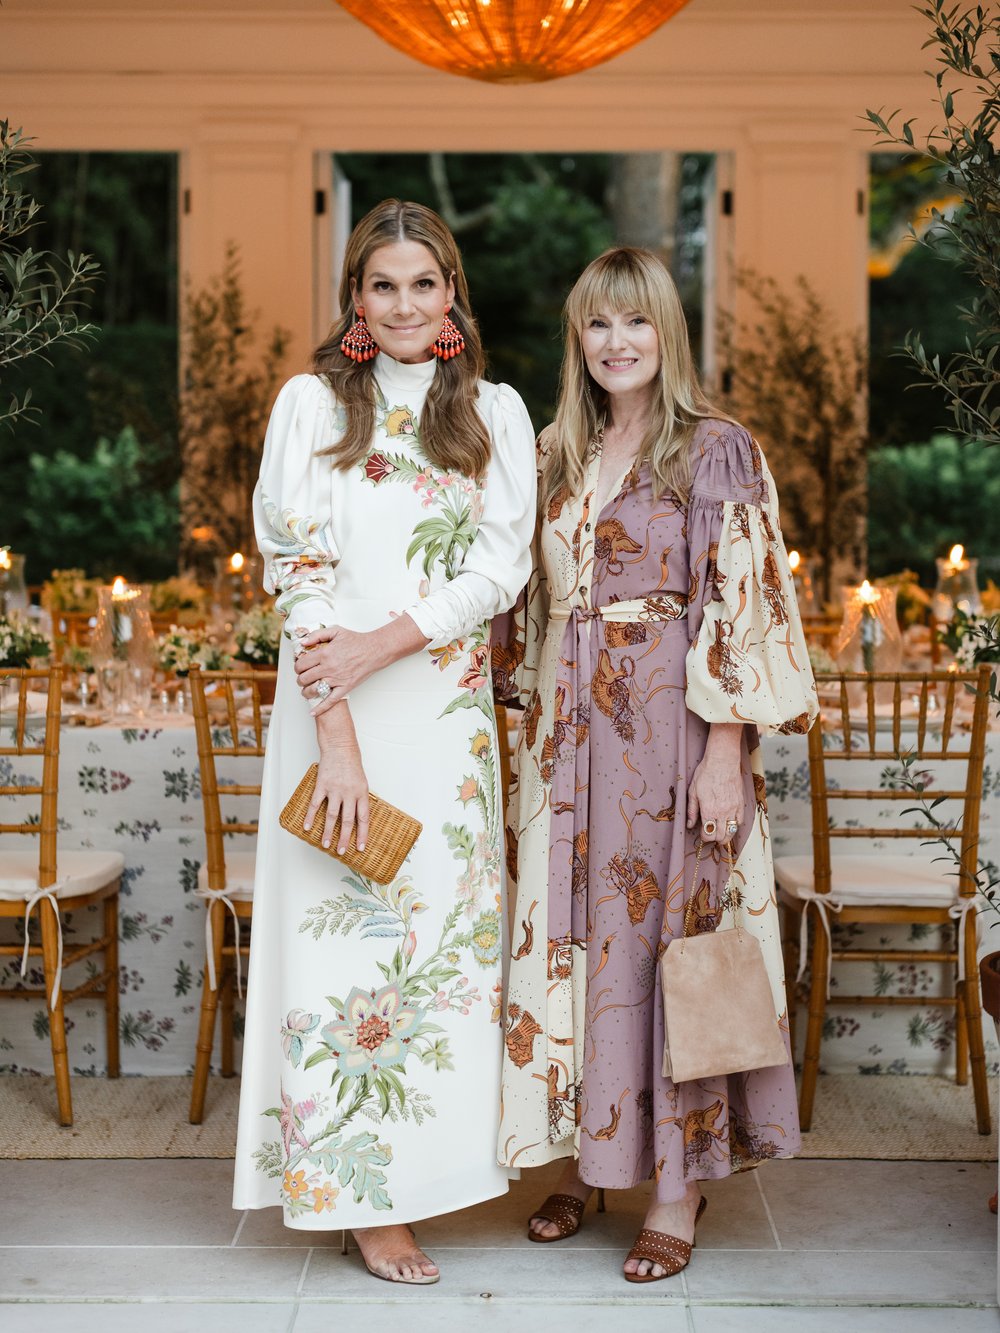    Photo: Ben Rosser/BFA.com     2/14    Aerin Lauder and Amy Astley       attend An Intimate Dinner Hosted by Aerin Lauder and Amy Astley on Thursday, July 13, 2023.   